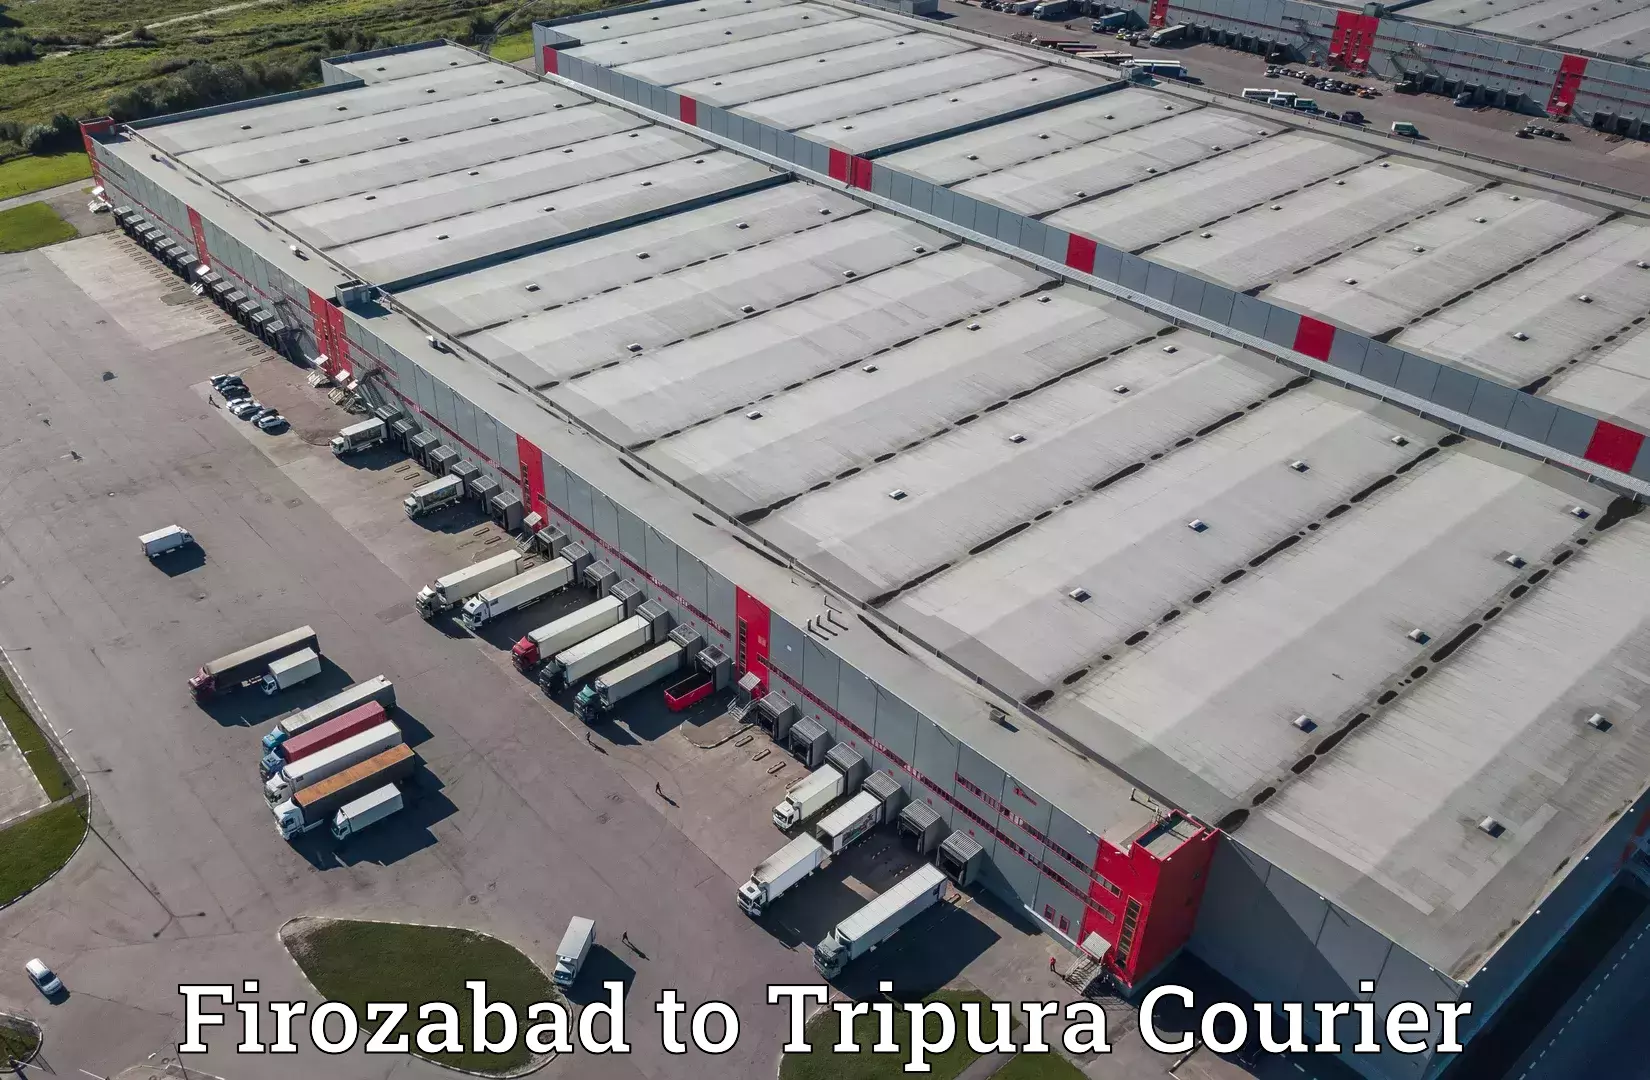 Comprehensive delivery network Firozabad to Udaipur Tripura